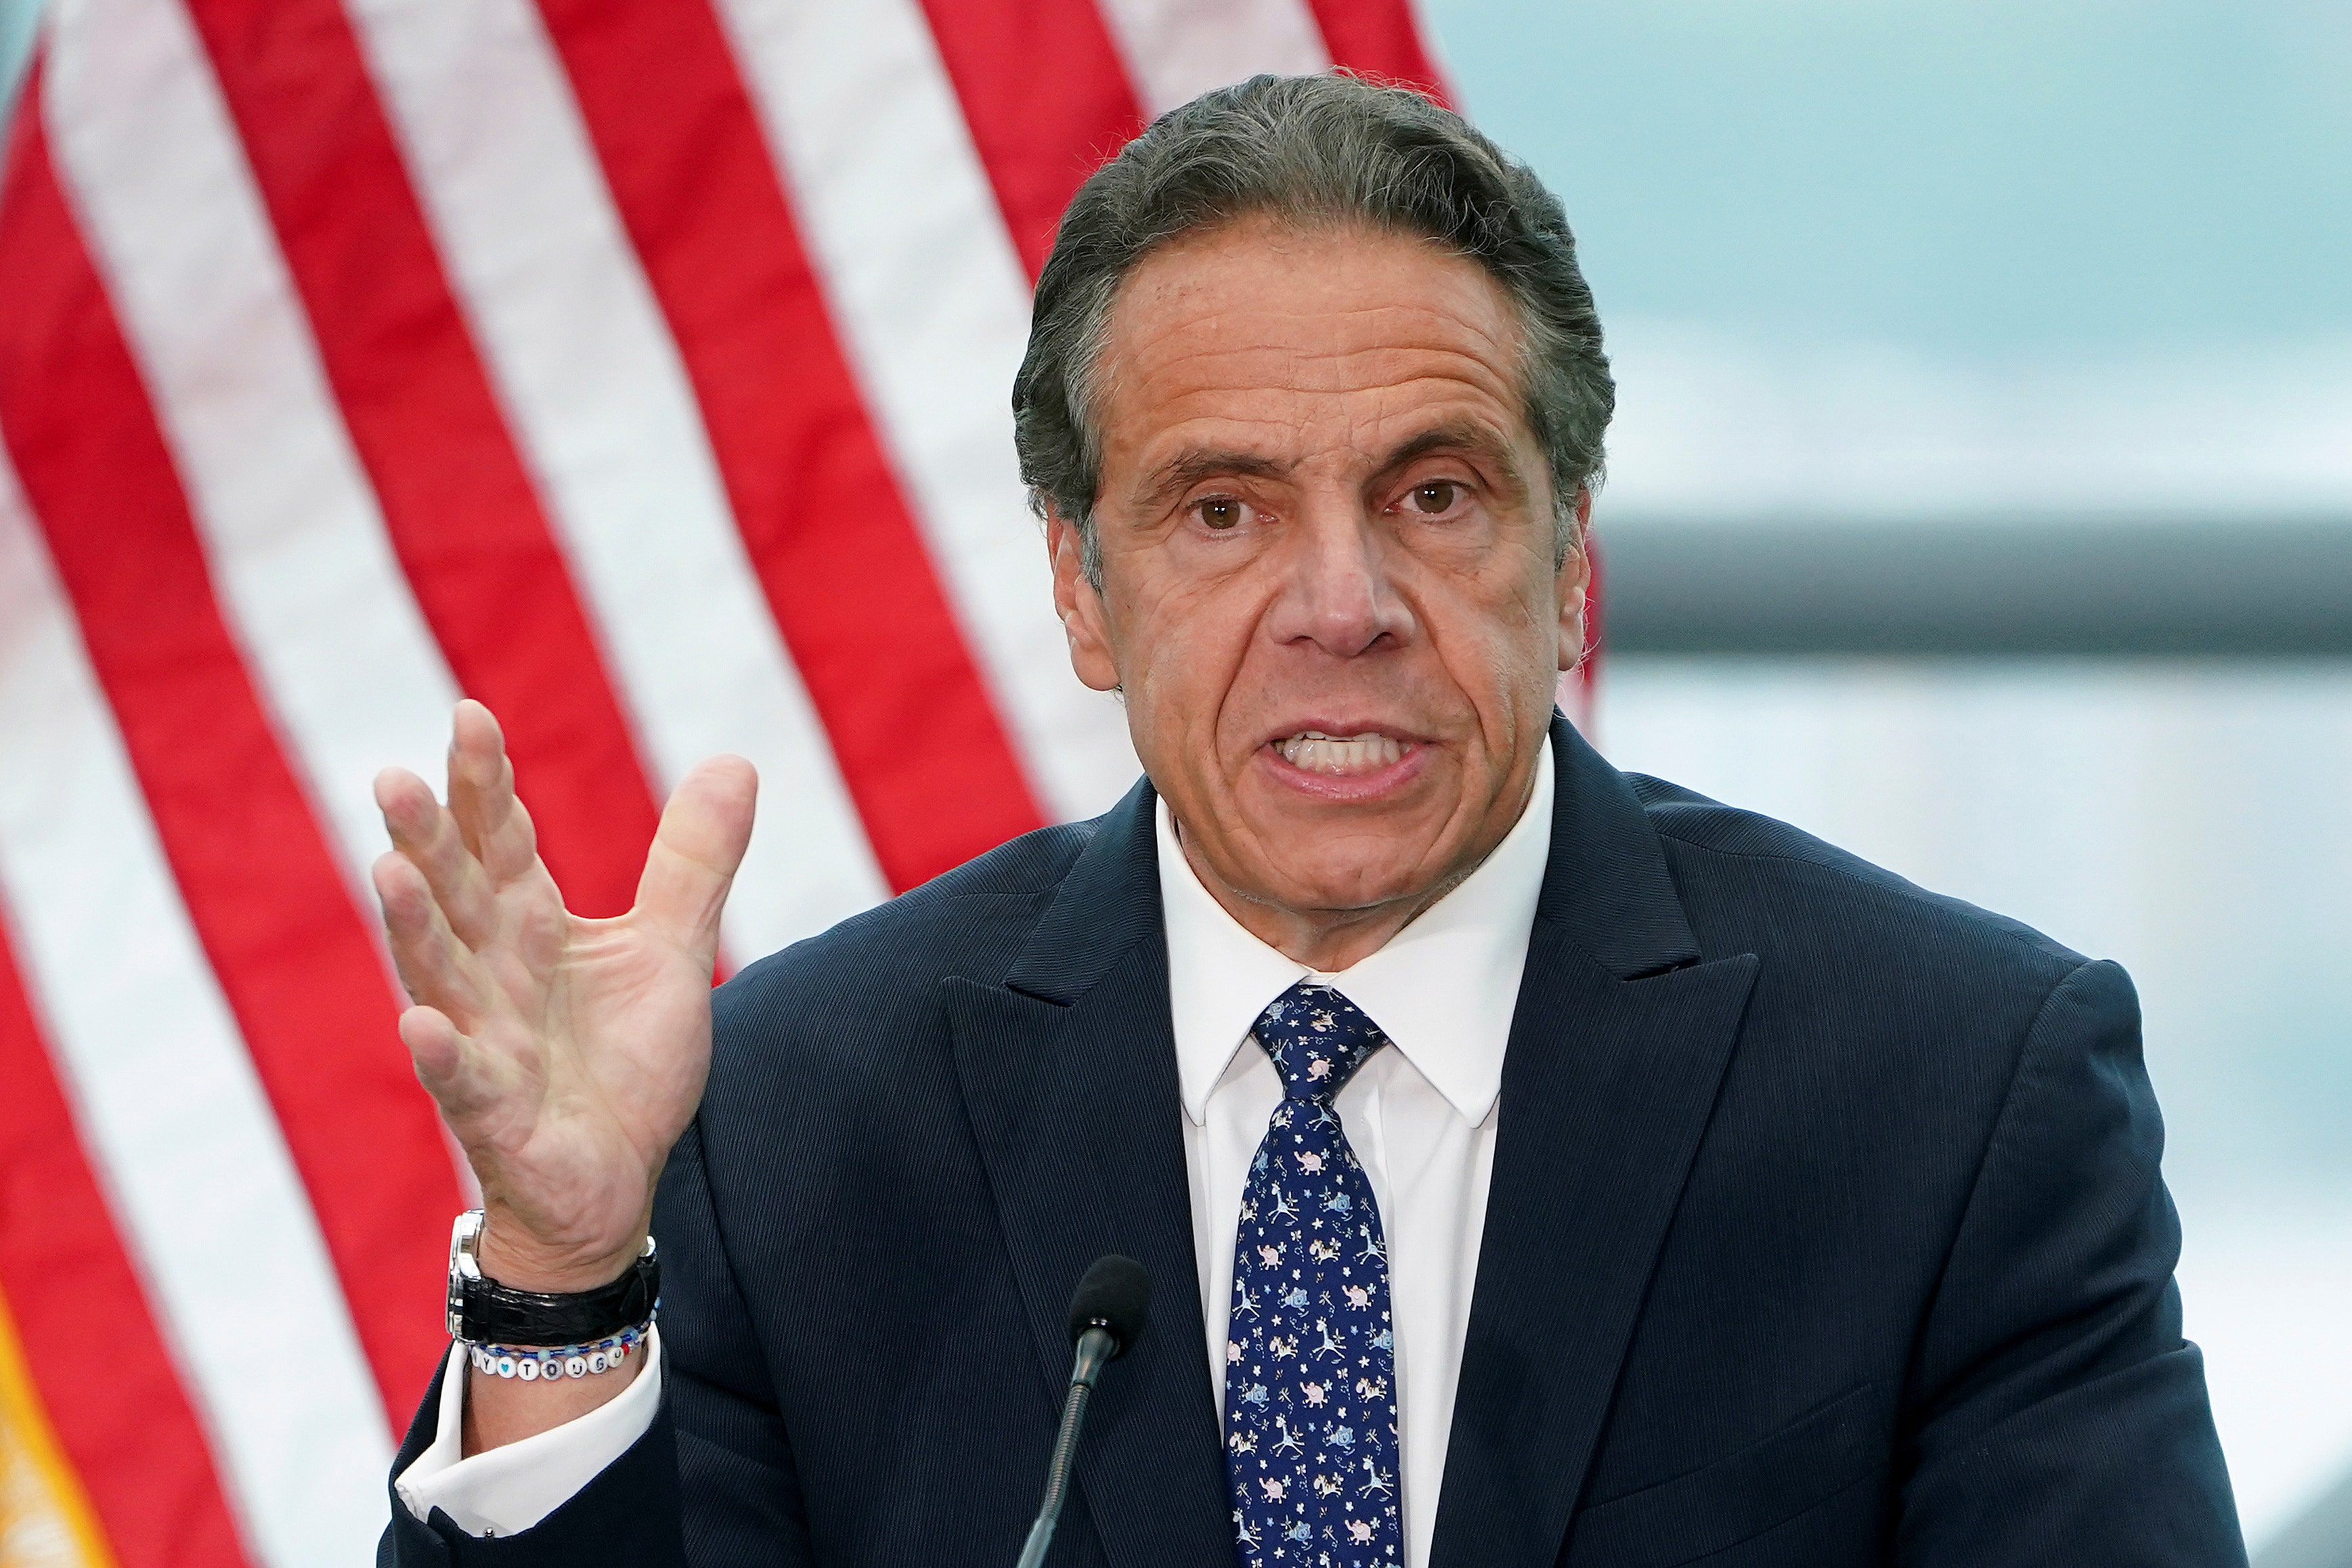 NY Dem blasts reporter who asked why she appeared with Andrew Cuomo after demanding he resign